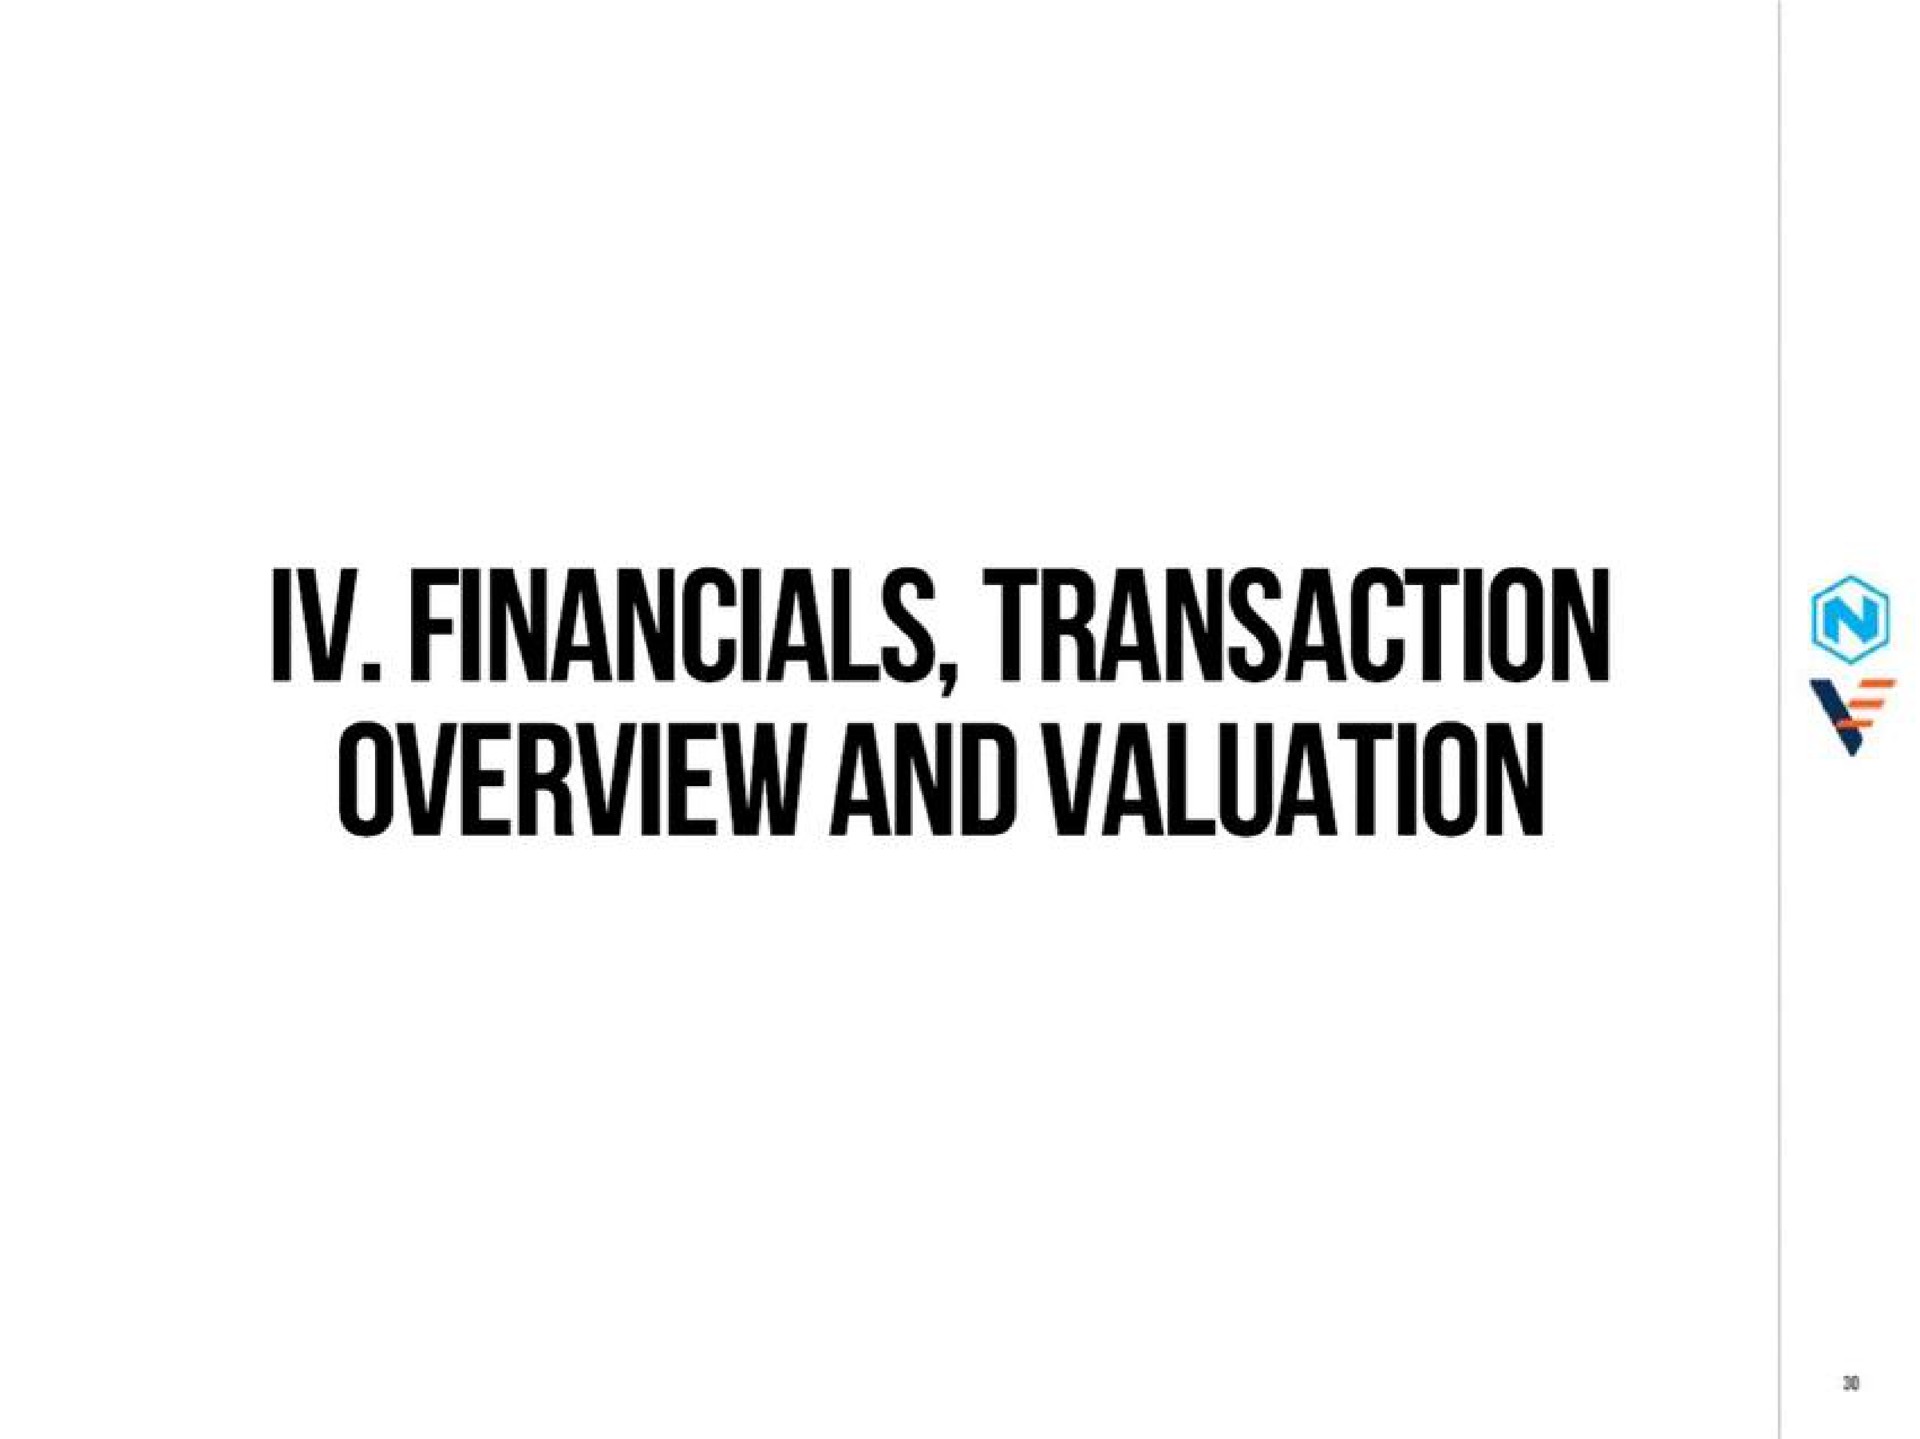 transaction overview and valuation | Nikola